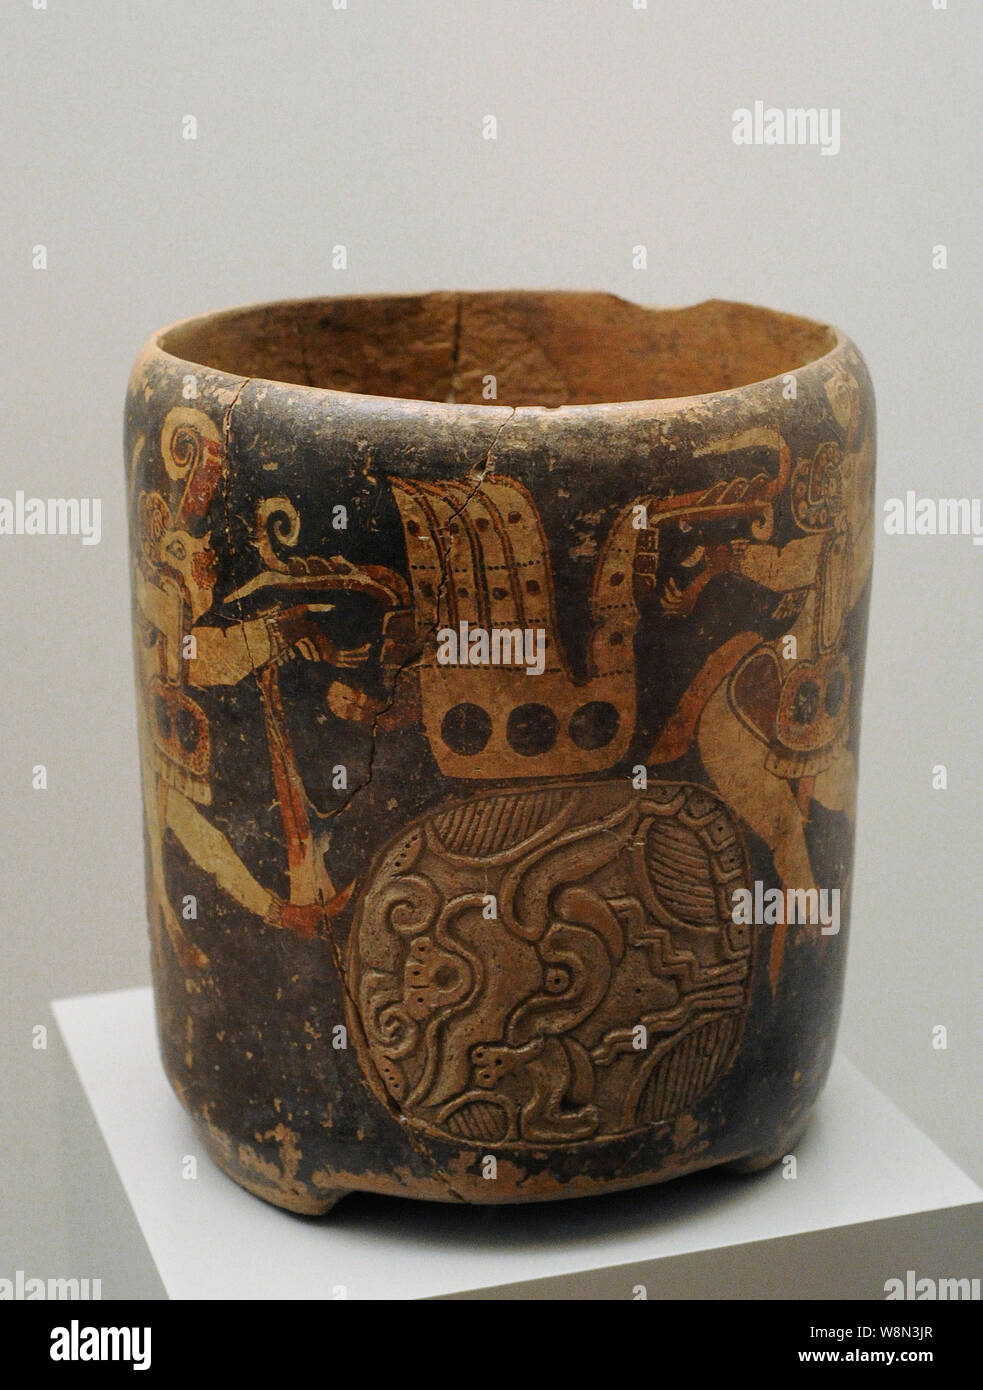 Decorated vase with figurative scene. Painted ceramic. Maya culture. Late Classic Period (600-900 AD). Mesoamerica. Mayan region. Museum of the Americas. Madrid, Spain. Stock Photo